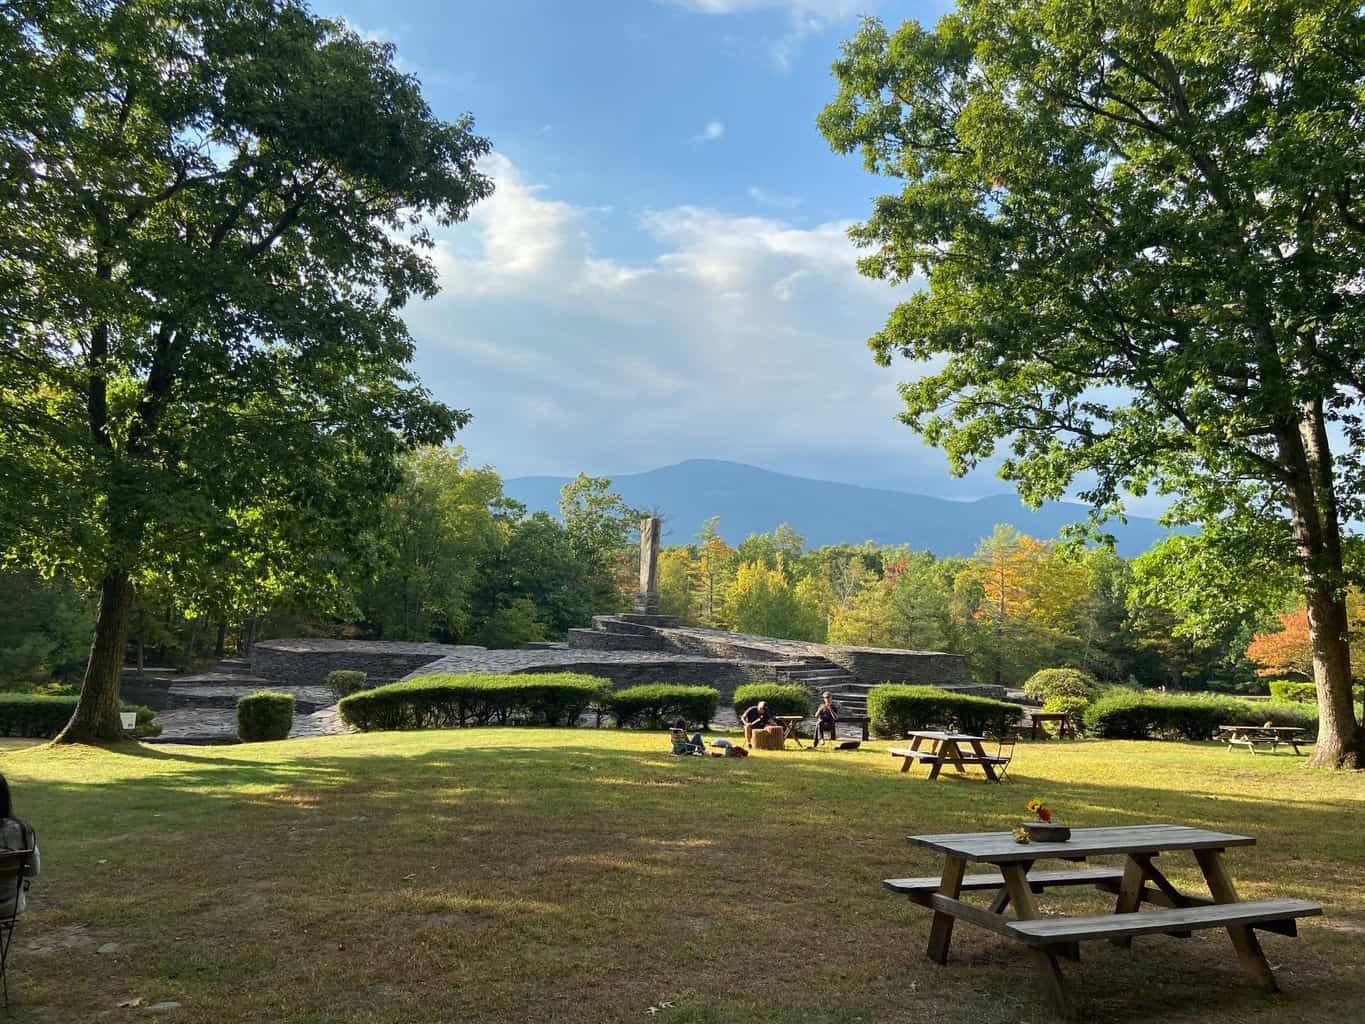 The stone structures of opus 40 with a picnnc table in the foreground and the catskill mountains behind. The foliage is changing color for fall